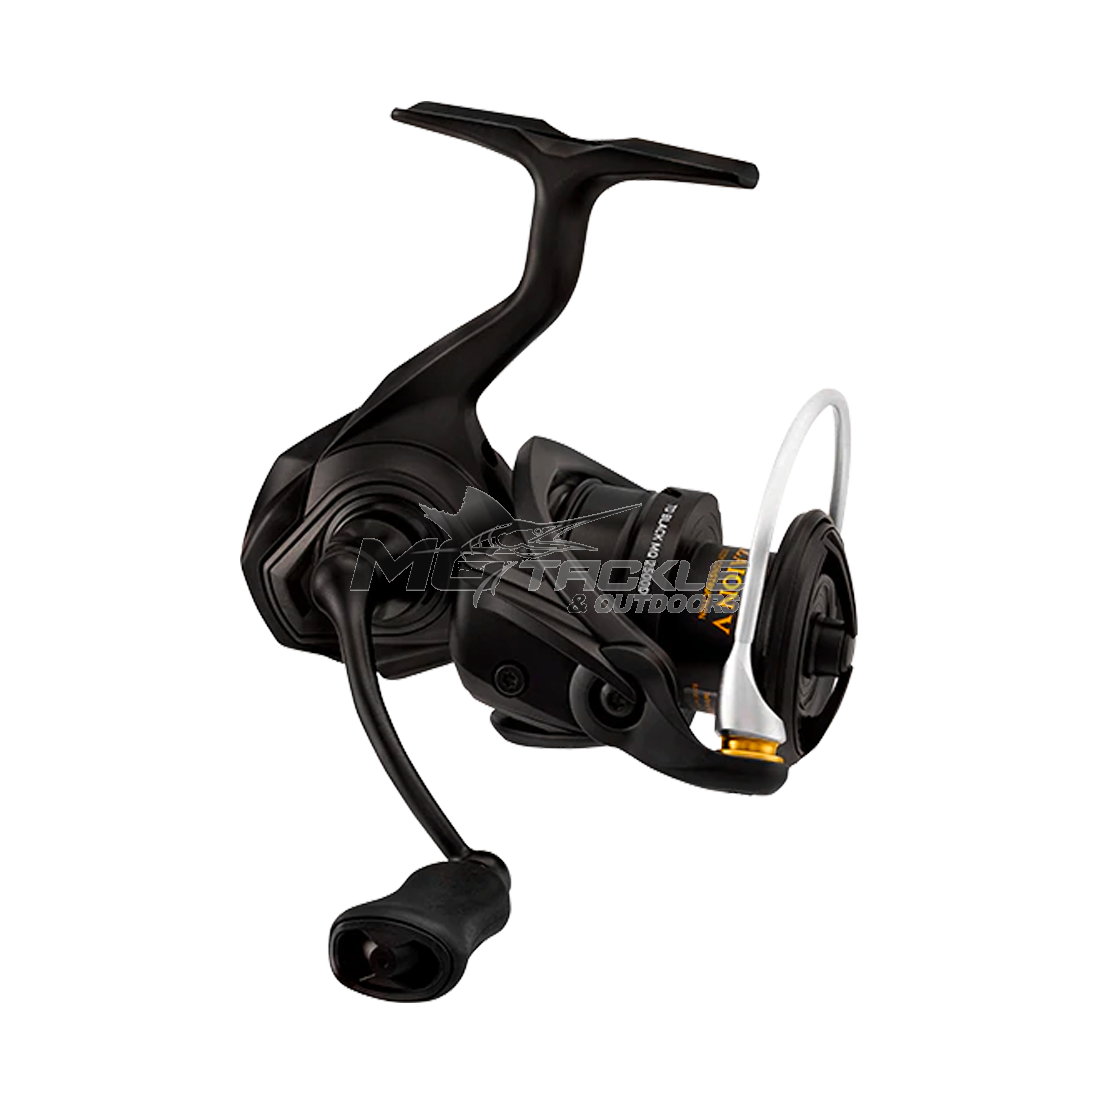 Reel Review - Daiwa Steez EX Spinning reel review